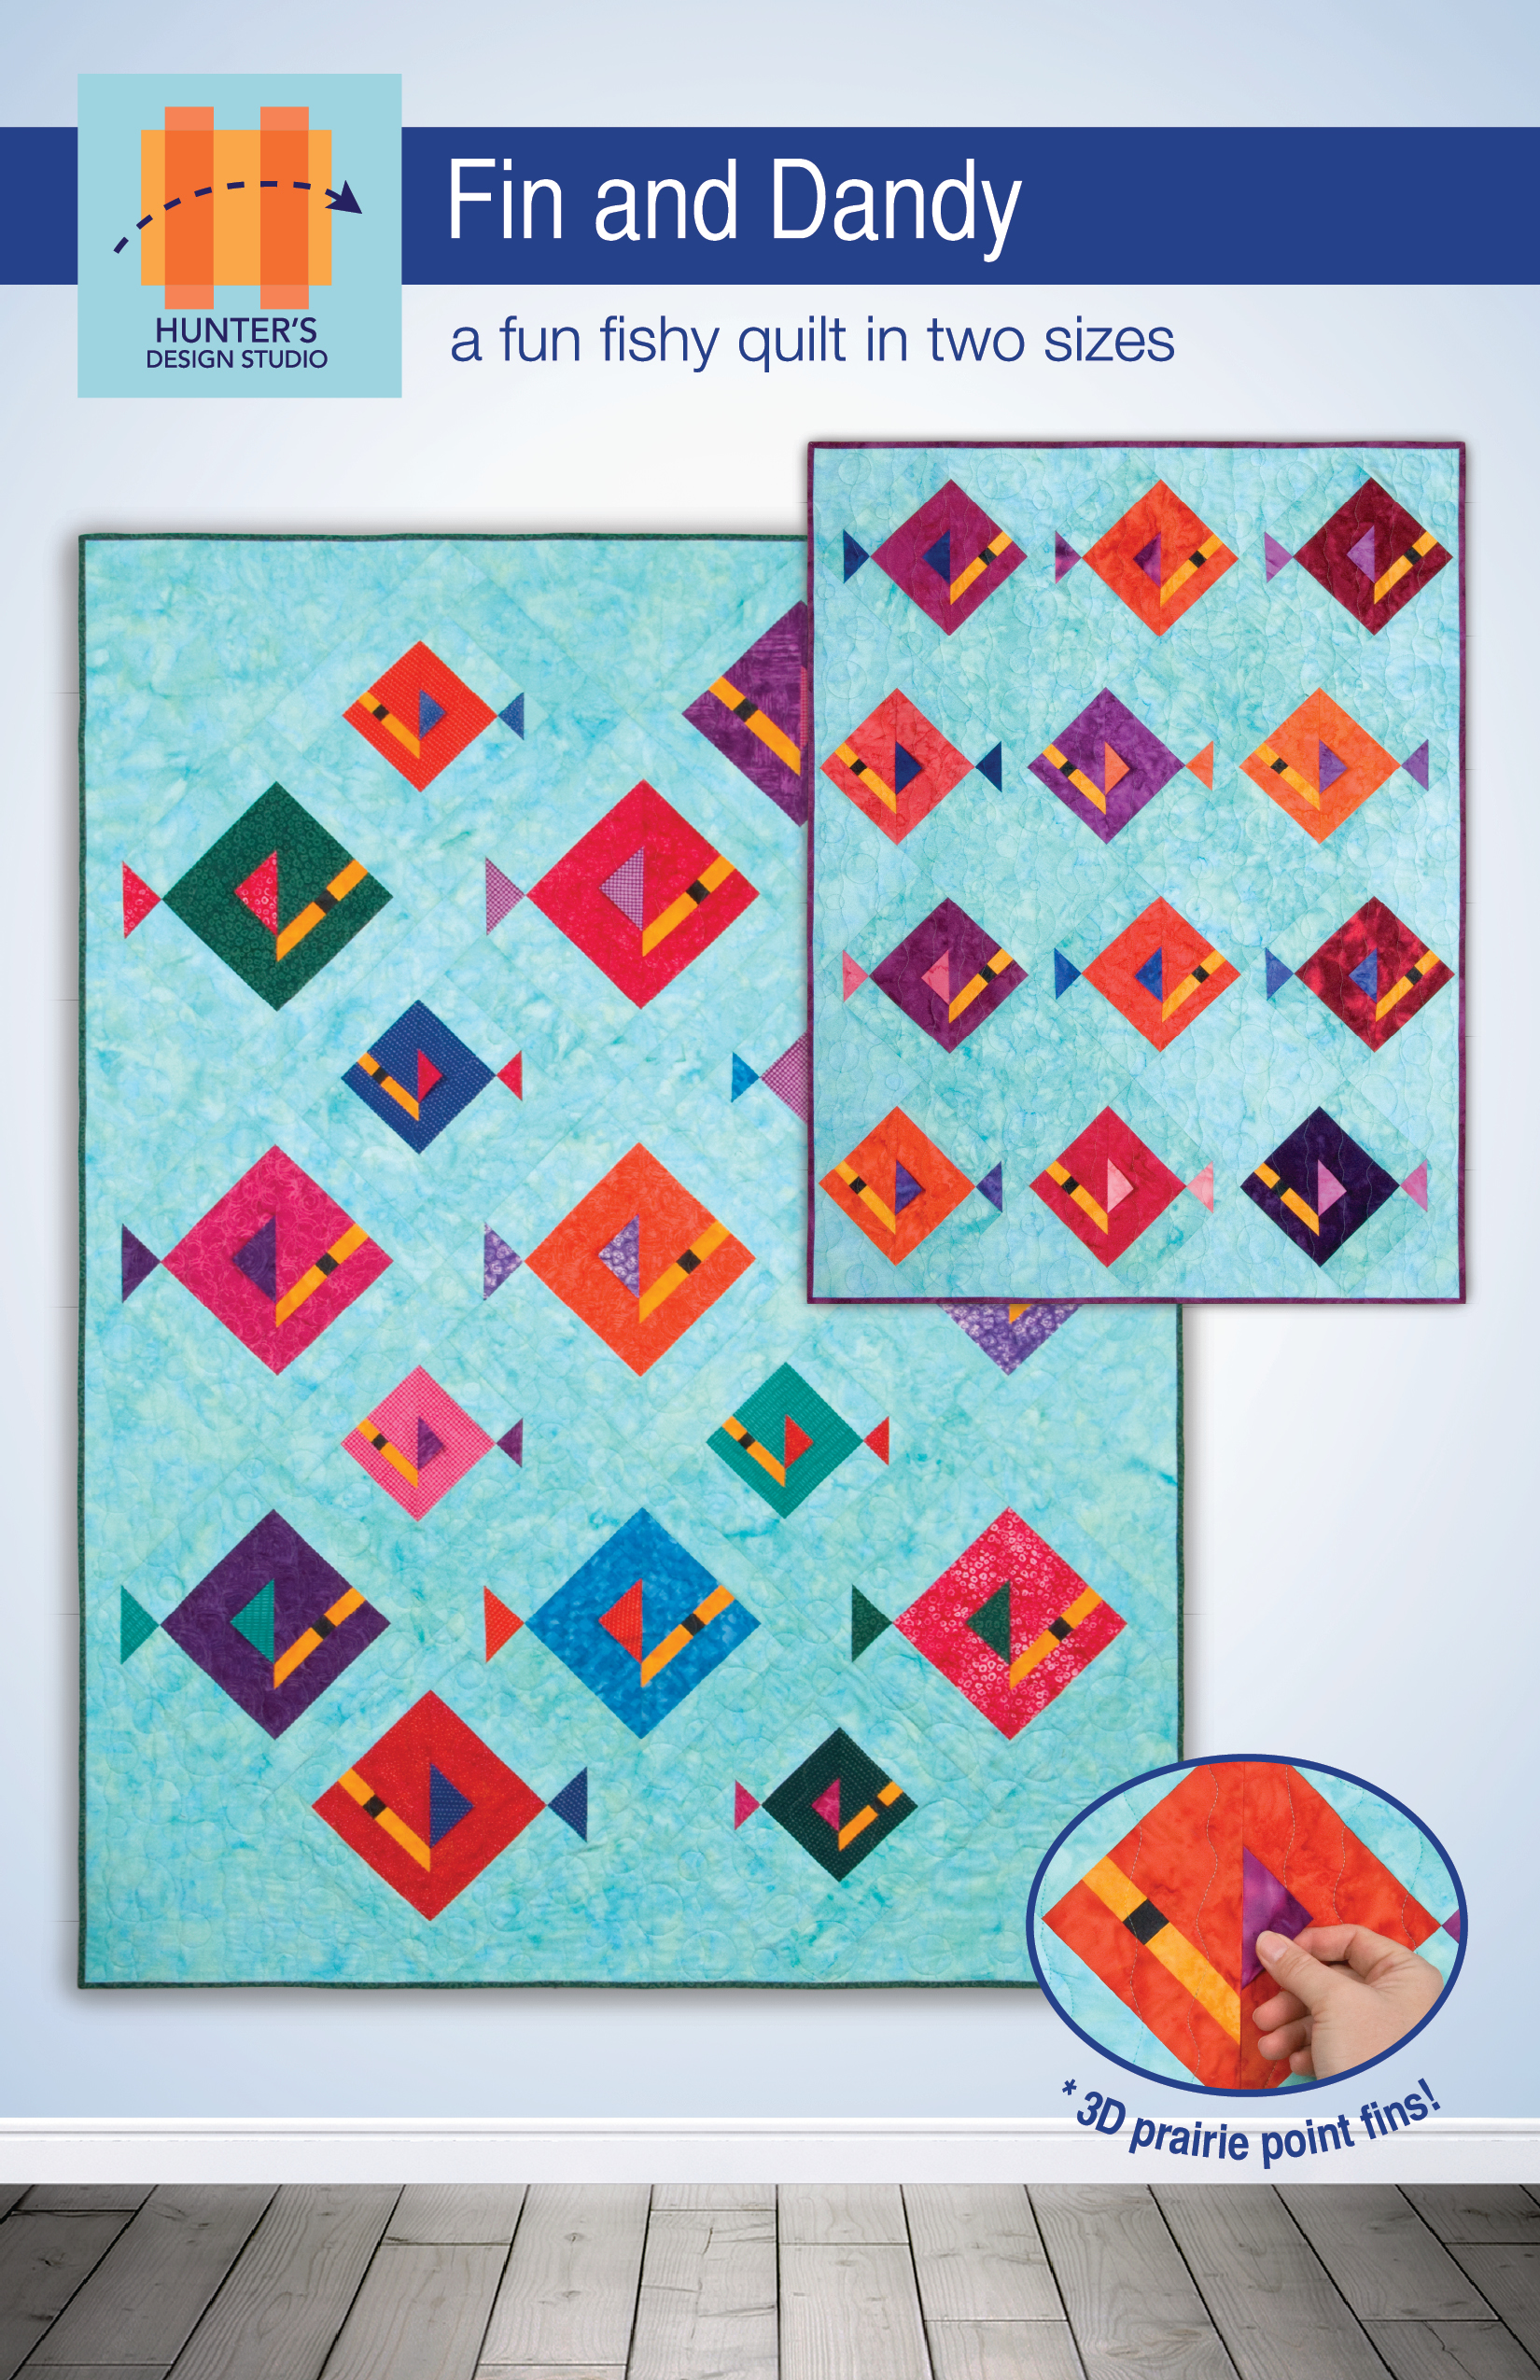 Fin and Dandy is a quilt with dimensional fish. The fins of the fish are made dimensional by utilizing prairie points.